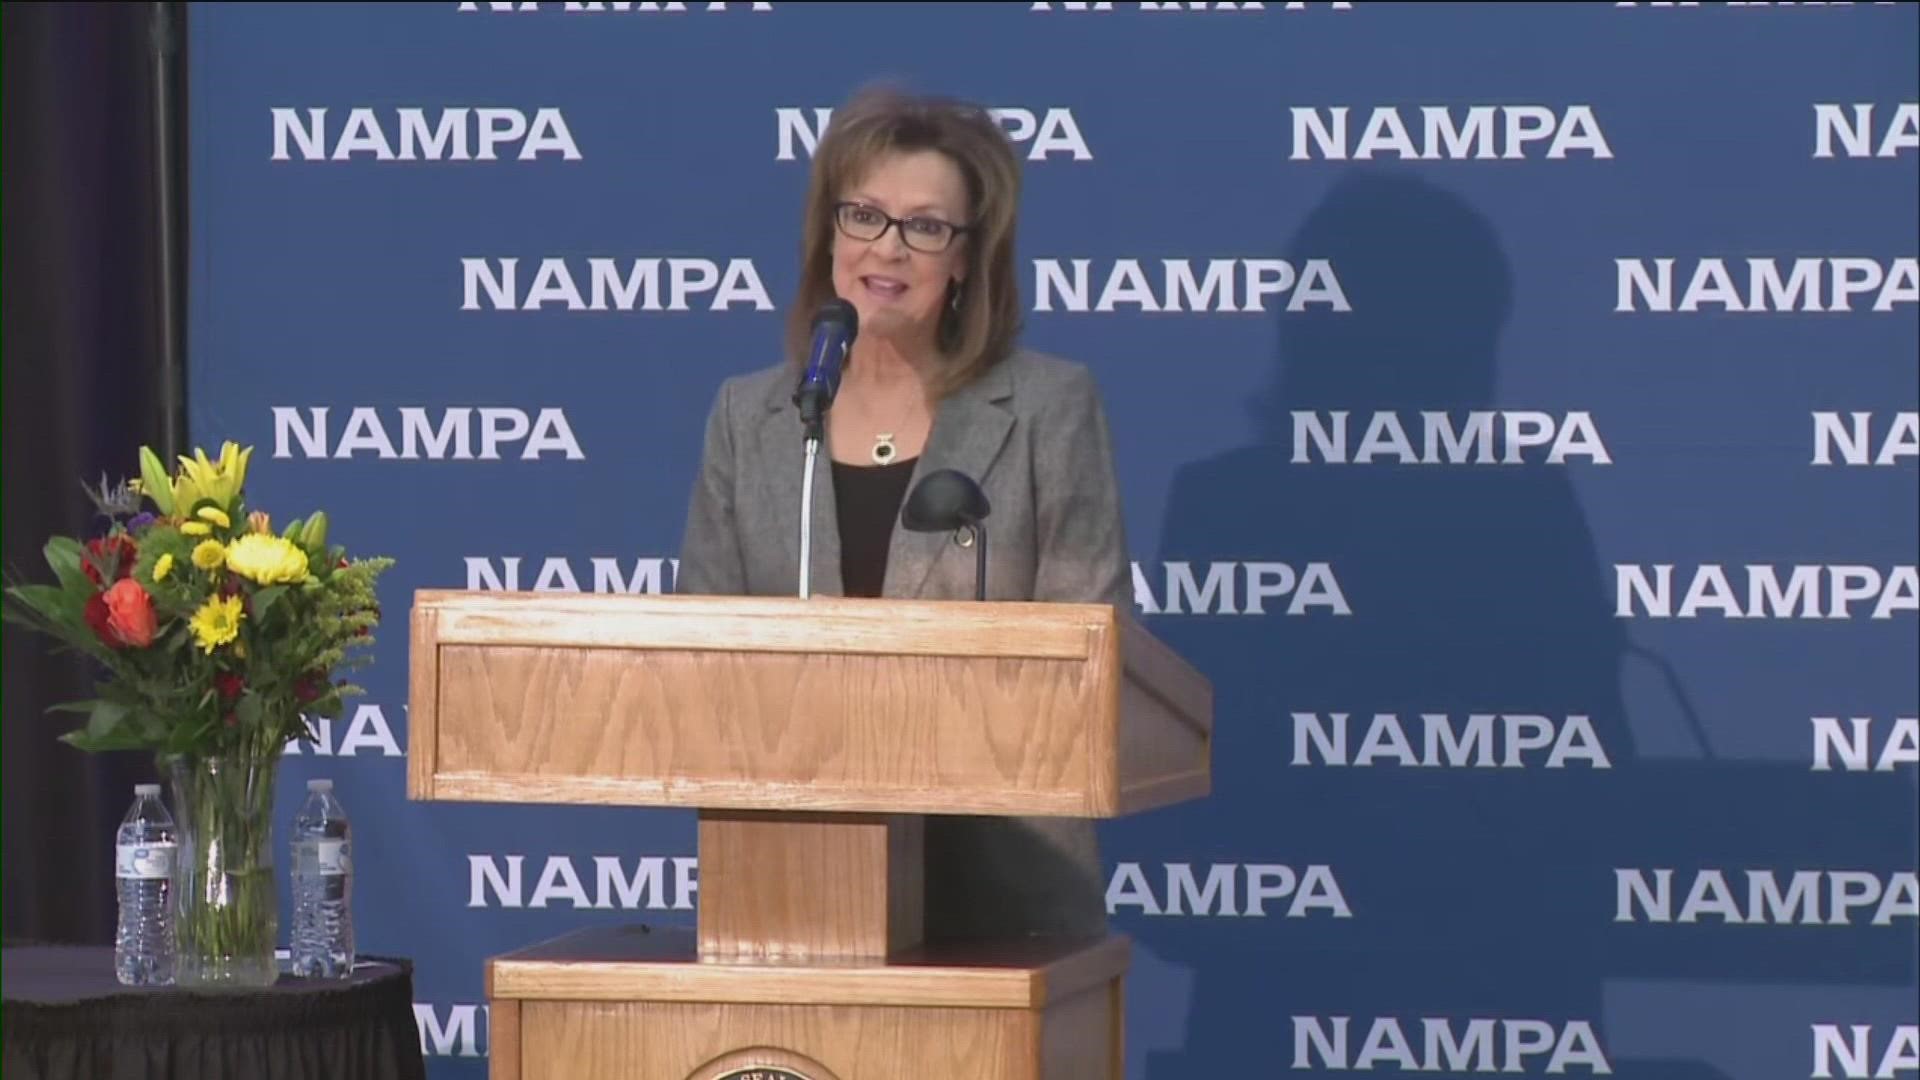 Nampa Mayor Debbie Kling delivered the 2022 state of the city address at the Nampa Civic Center Wednesday as part of the Nampa Chamber of Commerce's luncheon.